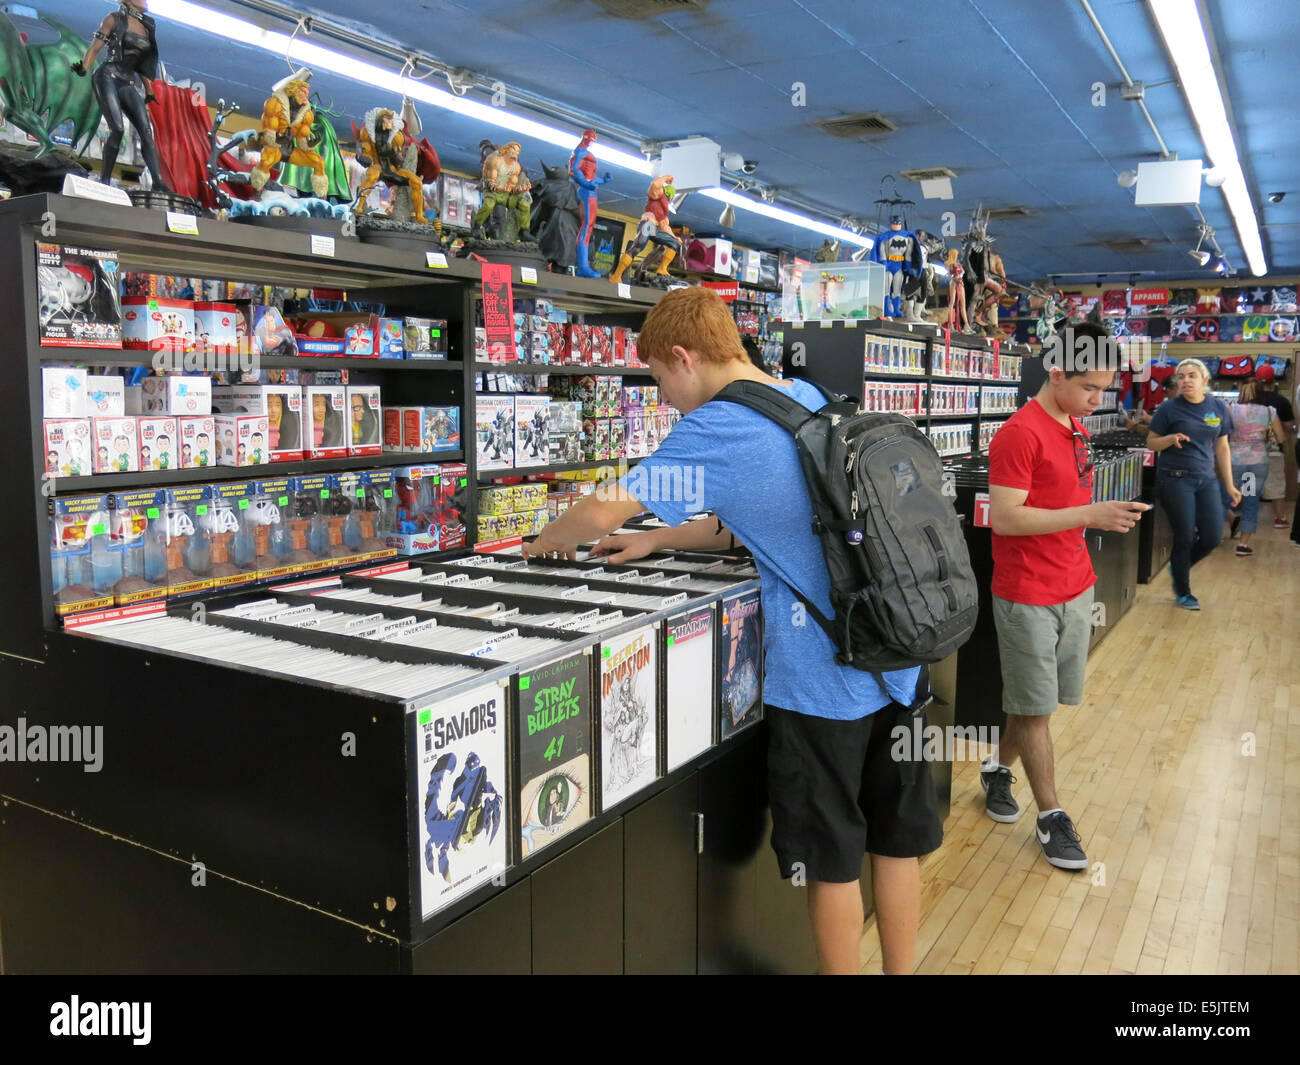 Shoppers in Midtown Comics Store, Times Square, NYC, USA Stock Photo